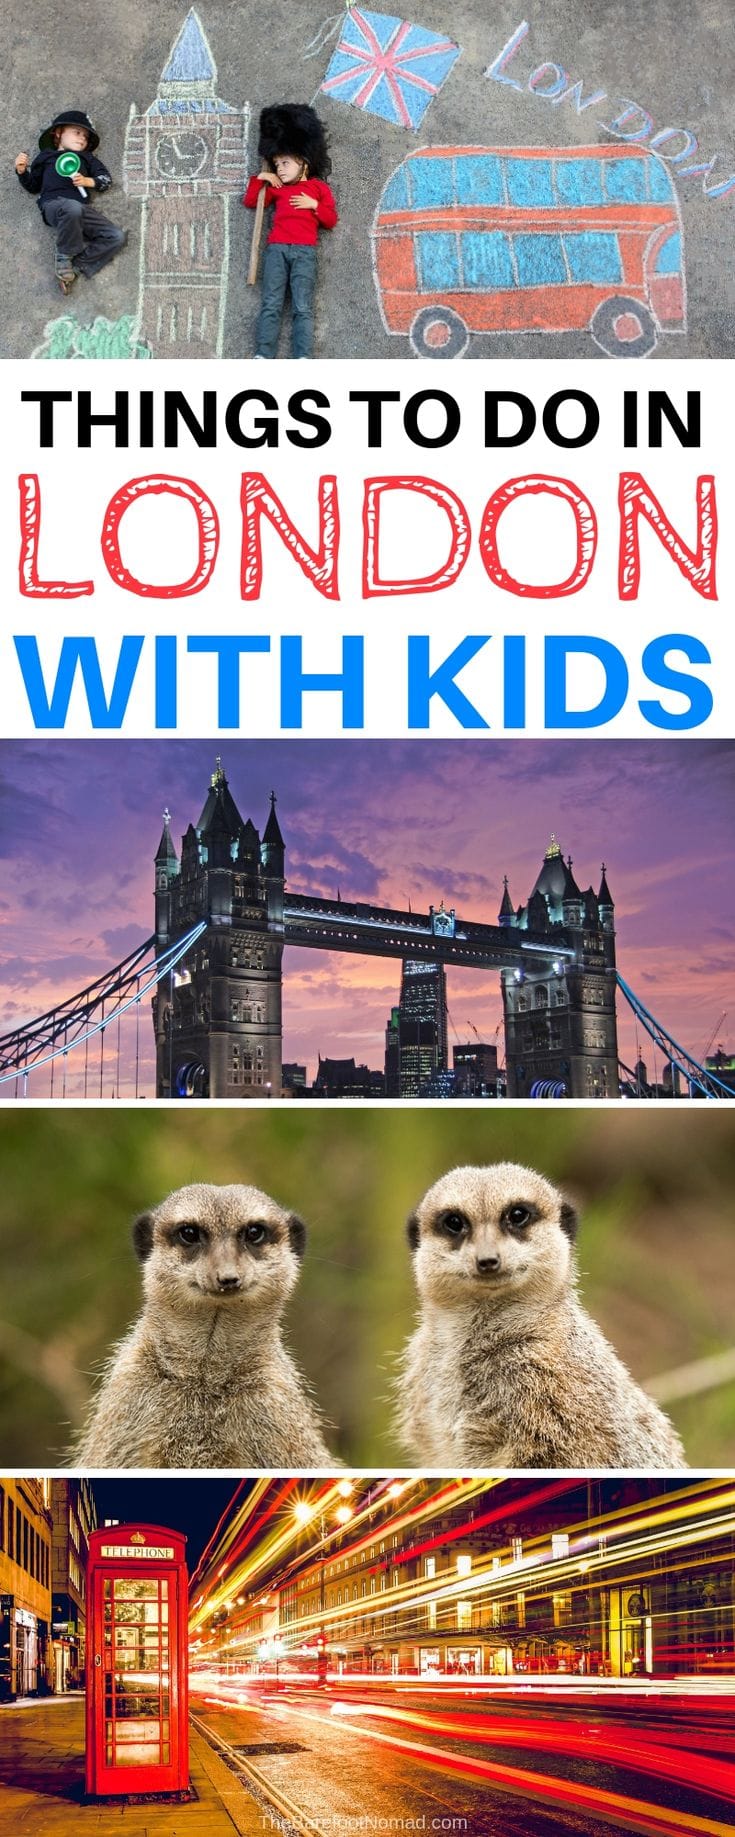 Things to do in London with kids that the whole family will love